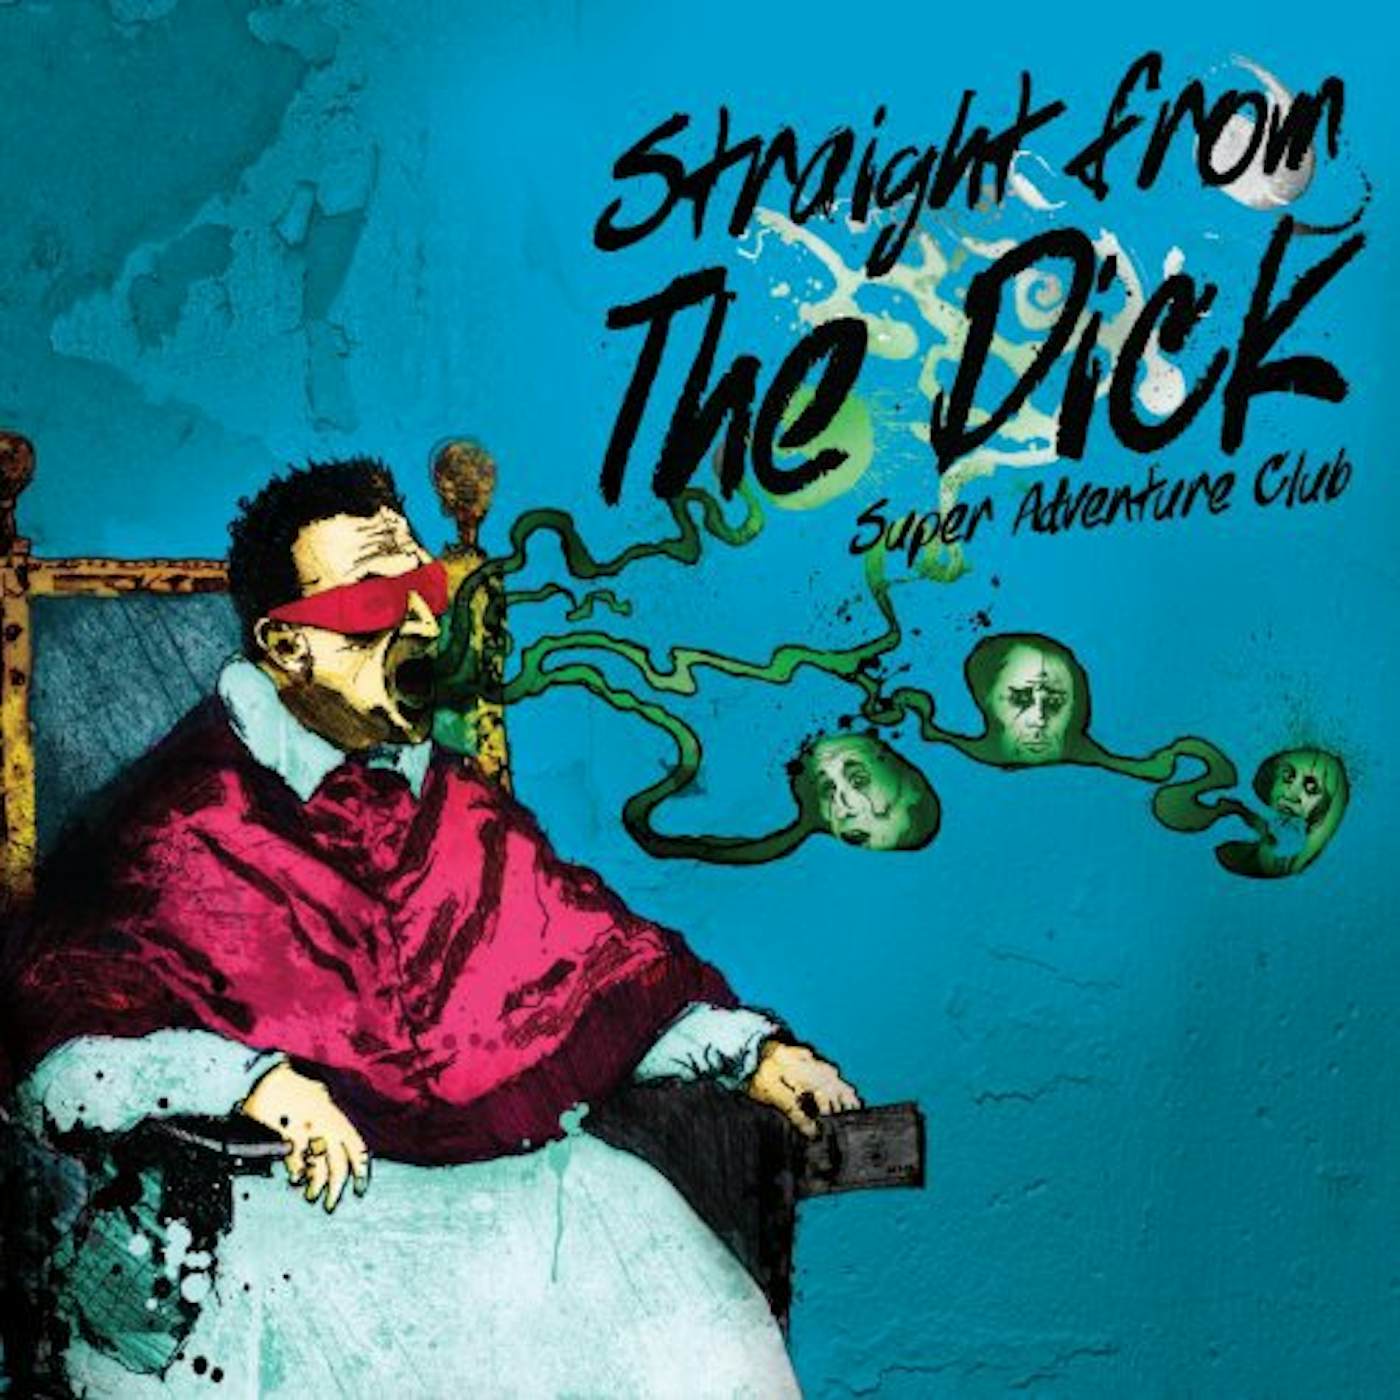 Super Adventure Club Straight From The Dick Vinyl Record